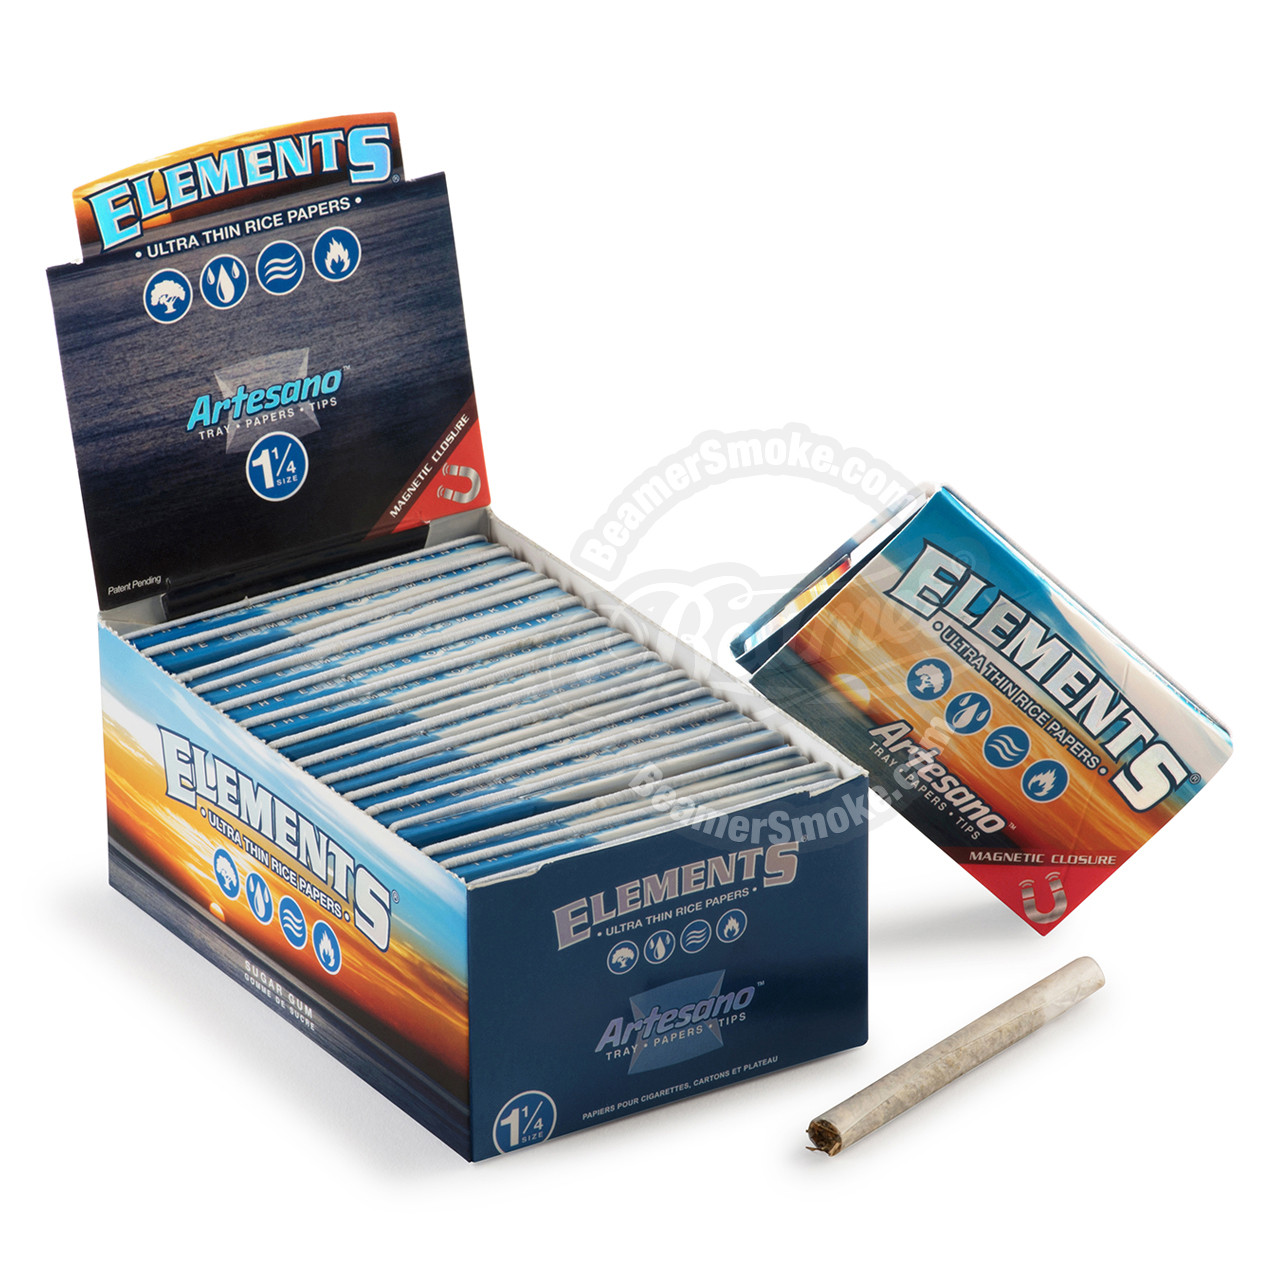 Elements Rice Artesano 1 ¼ Size Rolling Papers with Rolling Tips